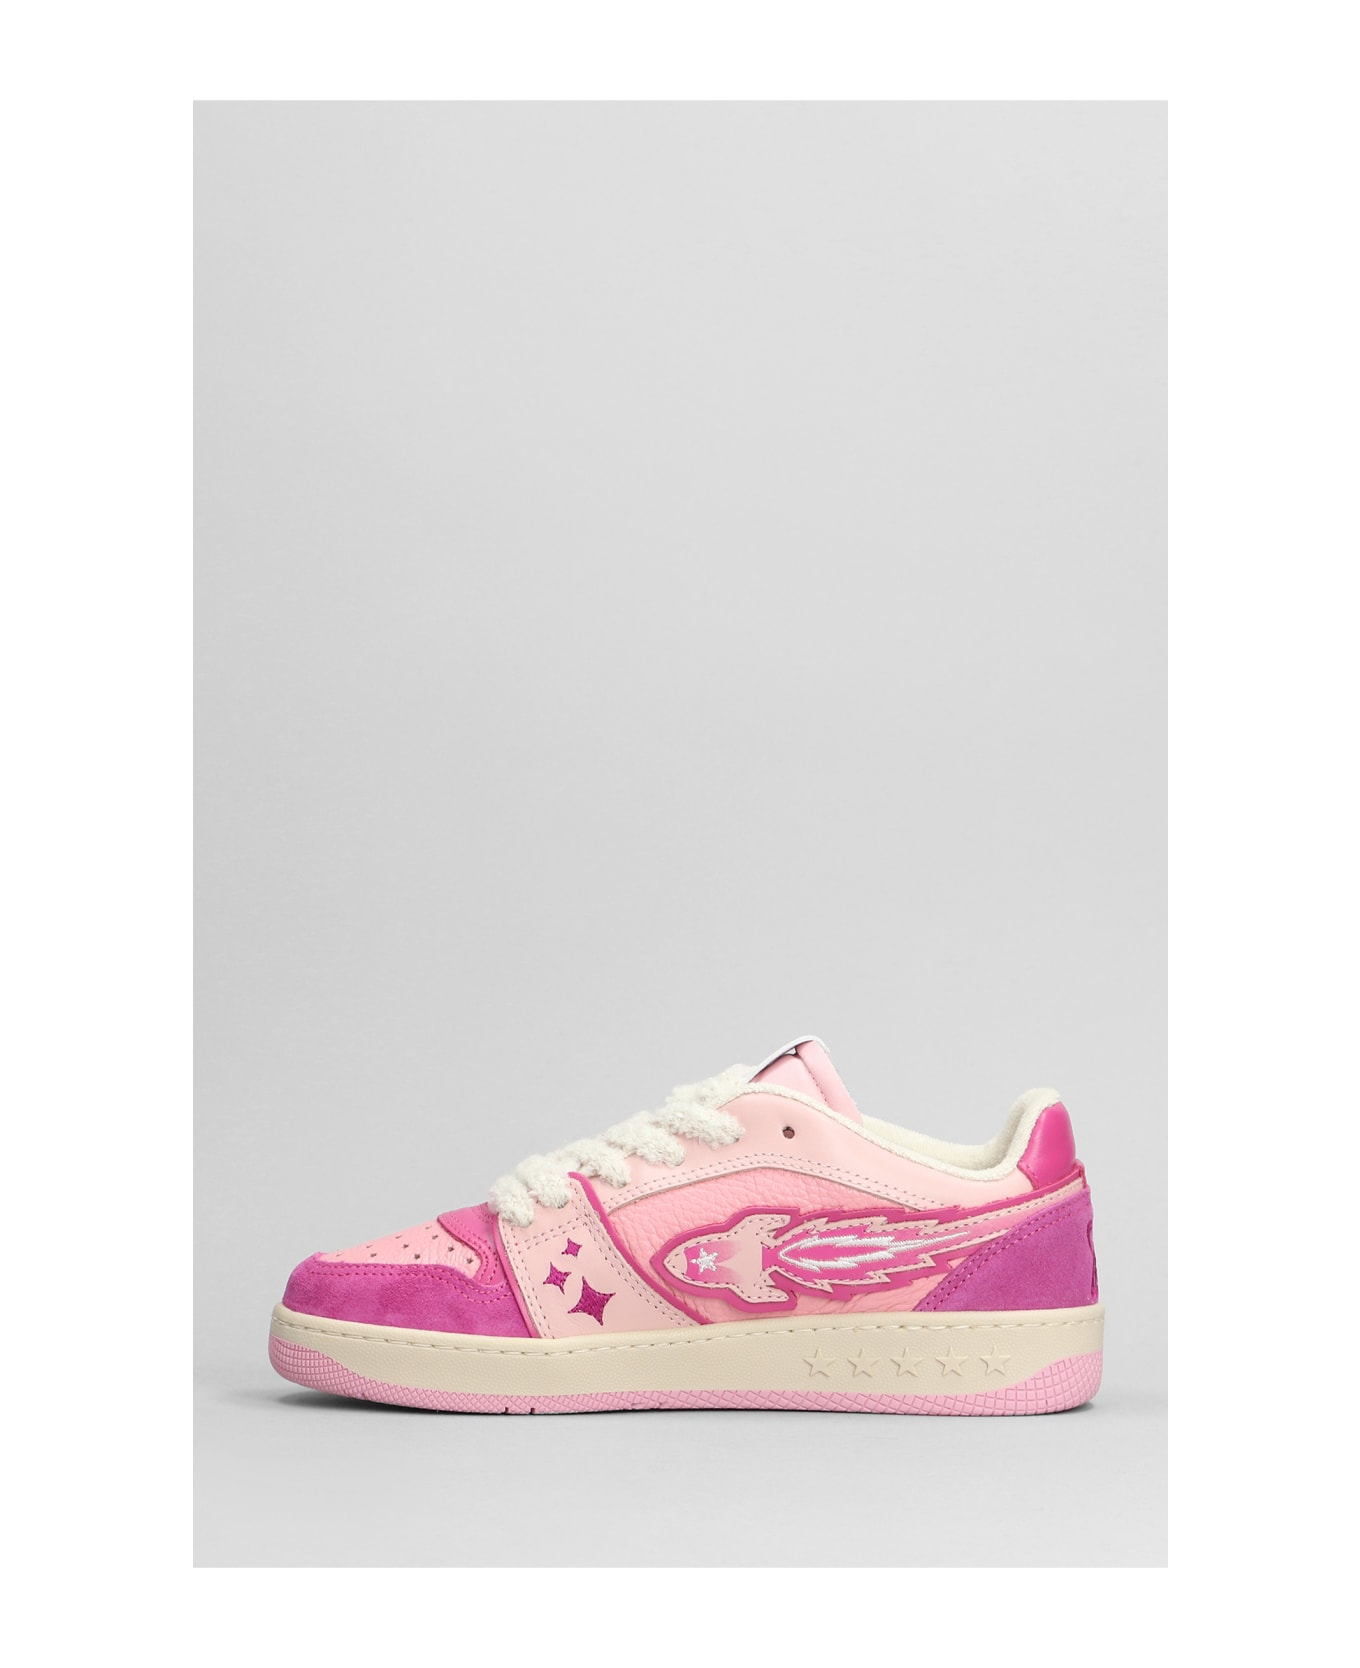 Enterprise Japan Sneakers In Rose-pink Suede And Leather - Pink